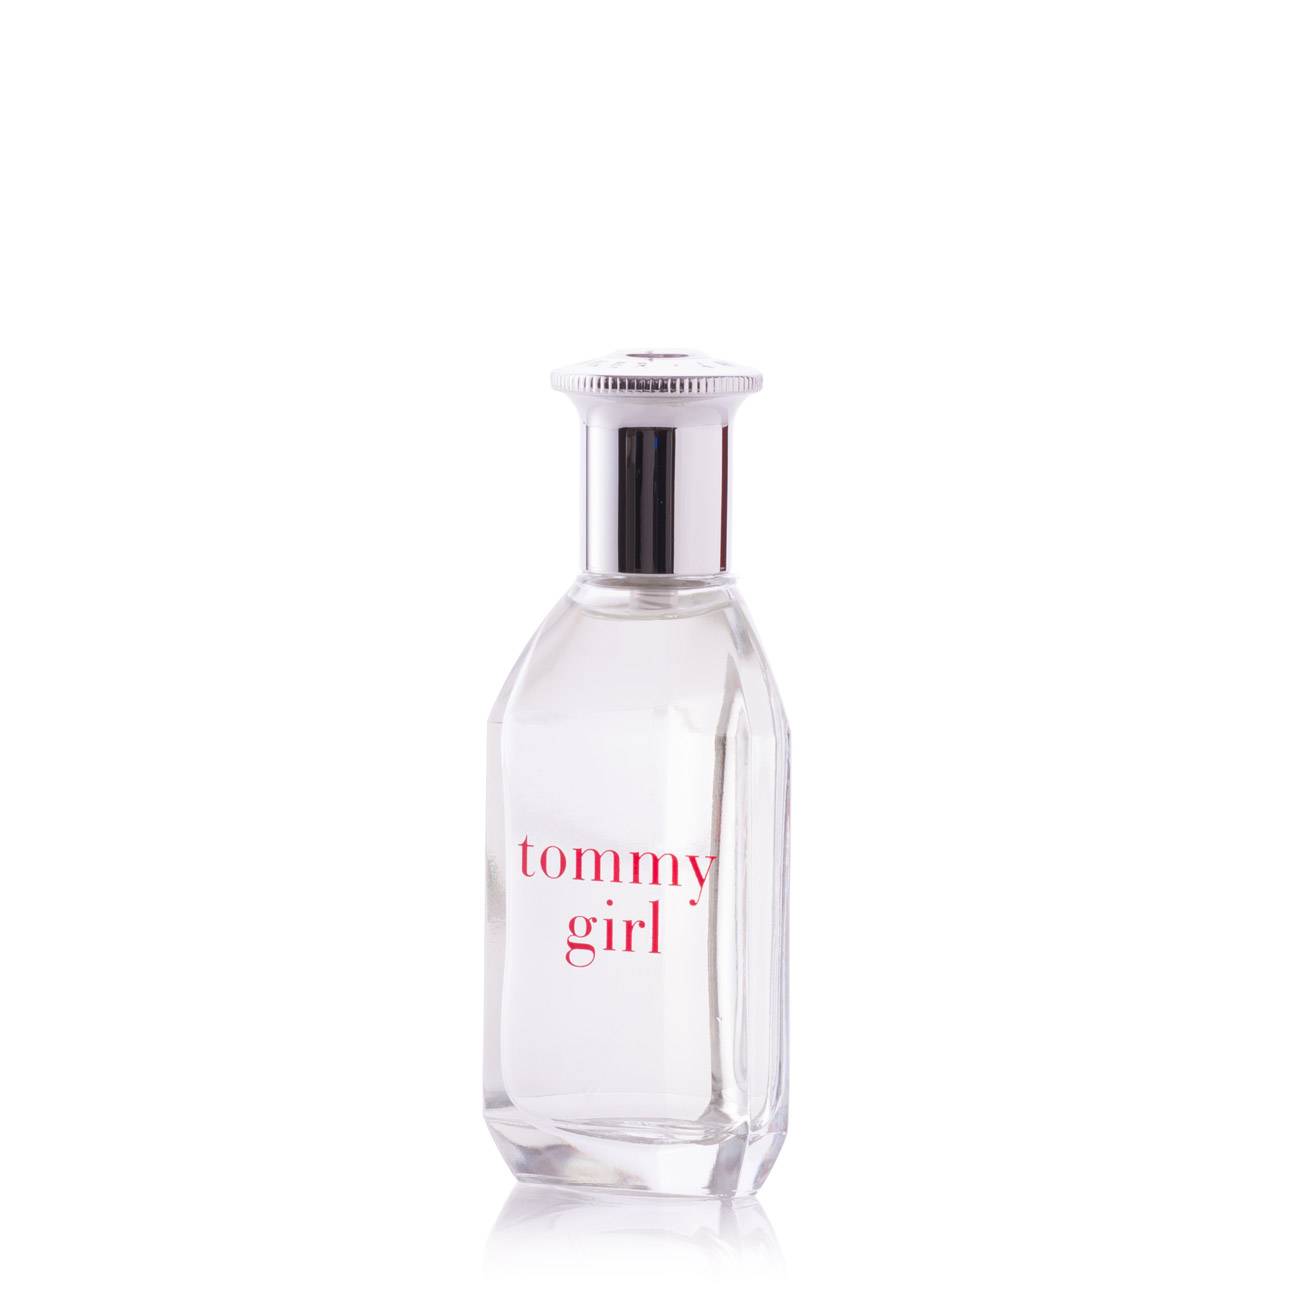 TOMMY GIRL 50ml